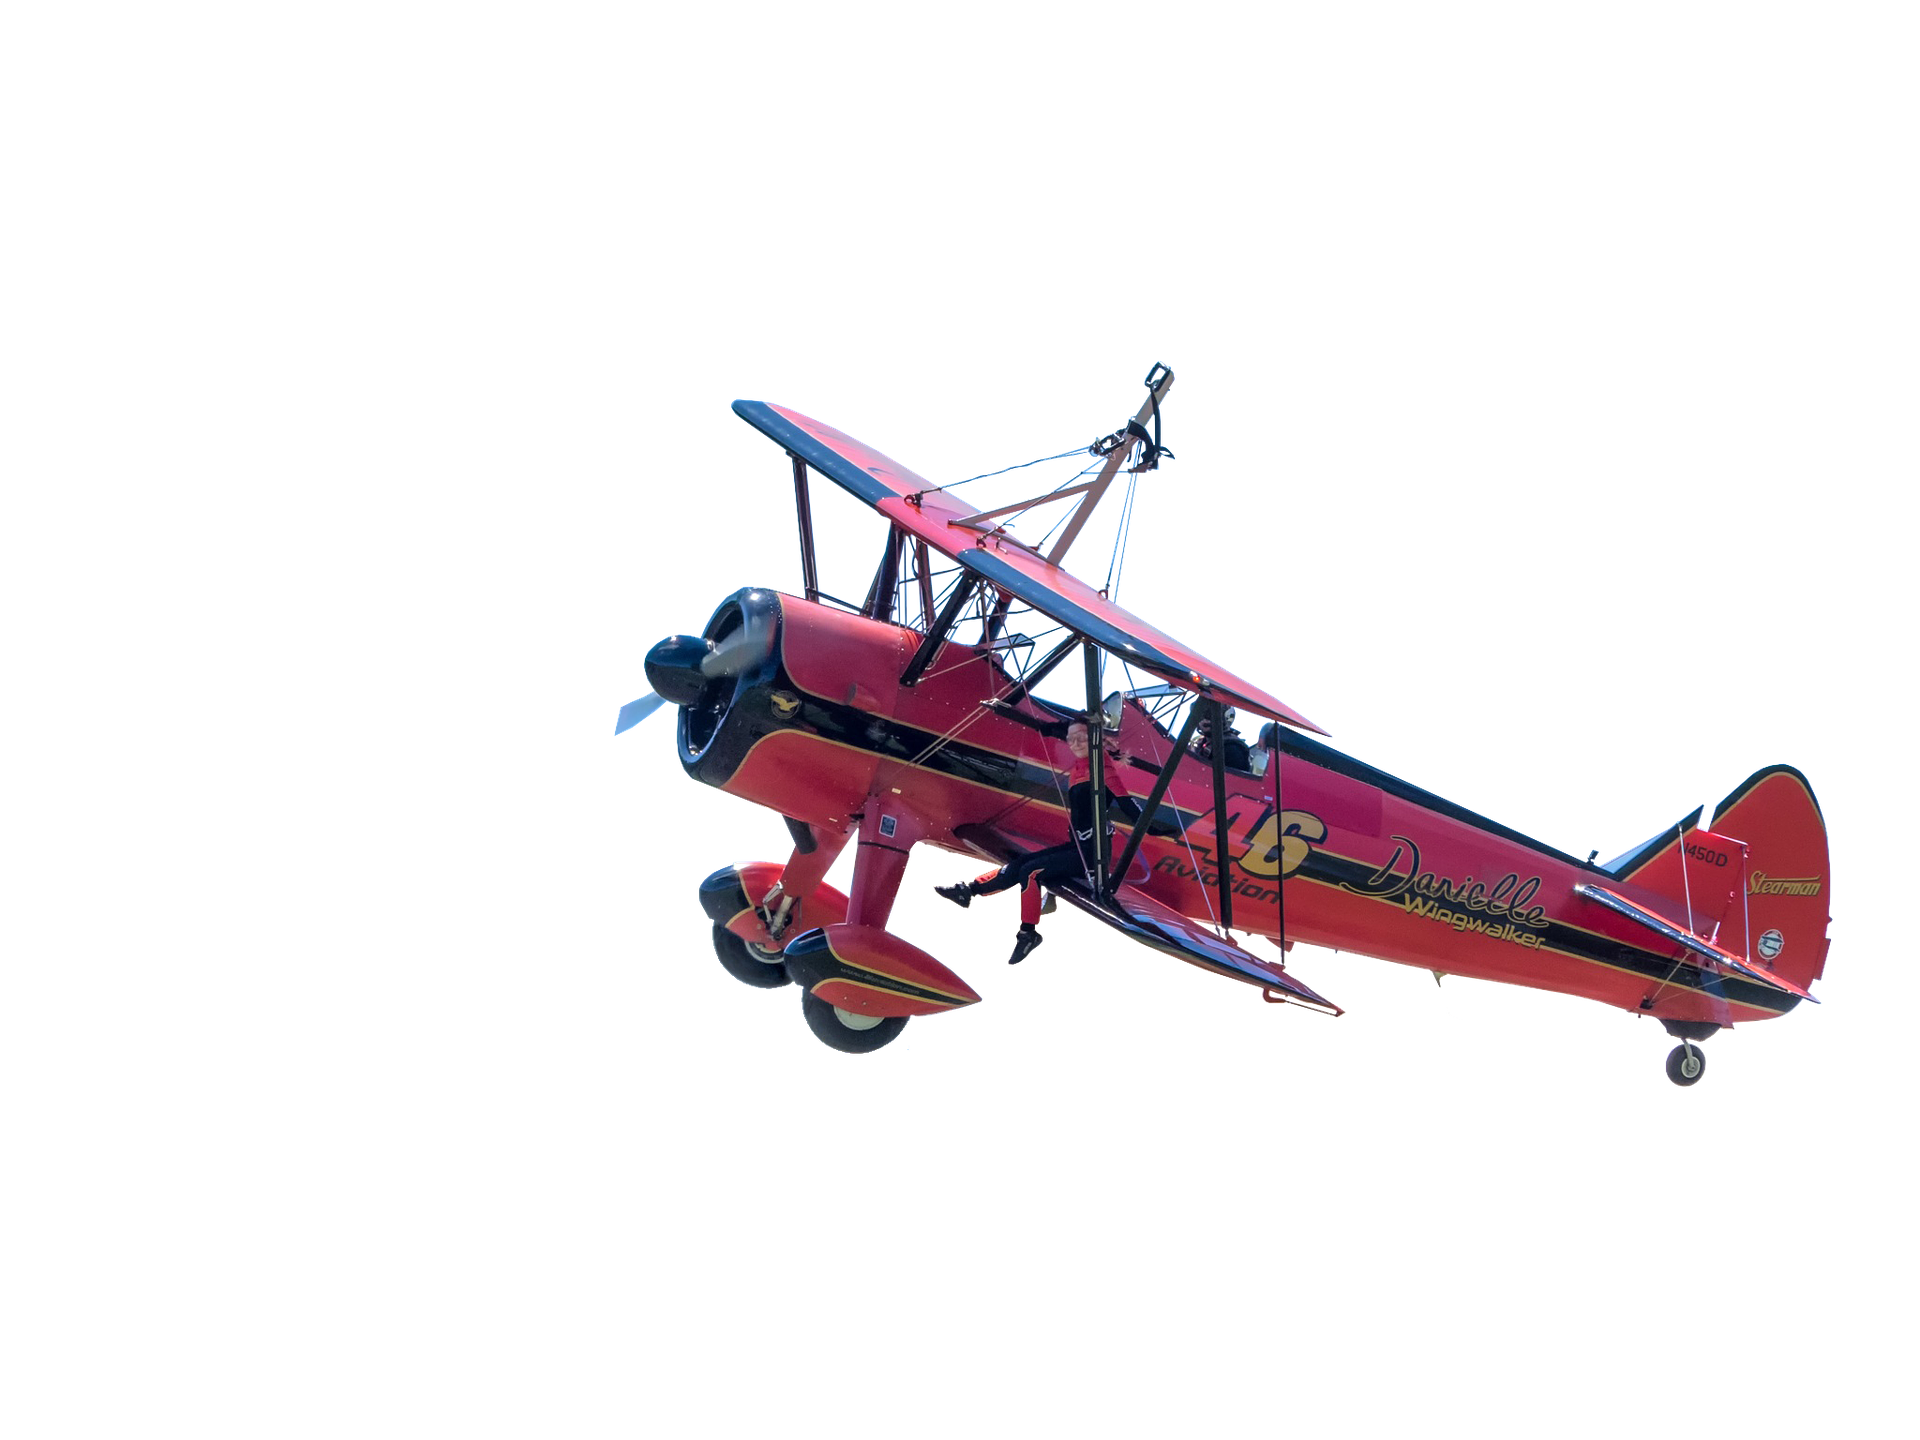 A Red And Black Airplane